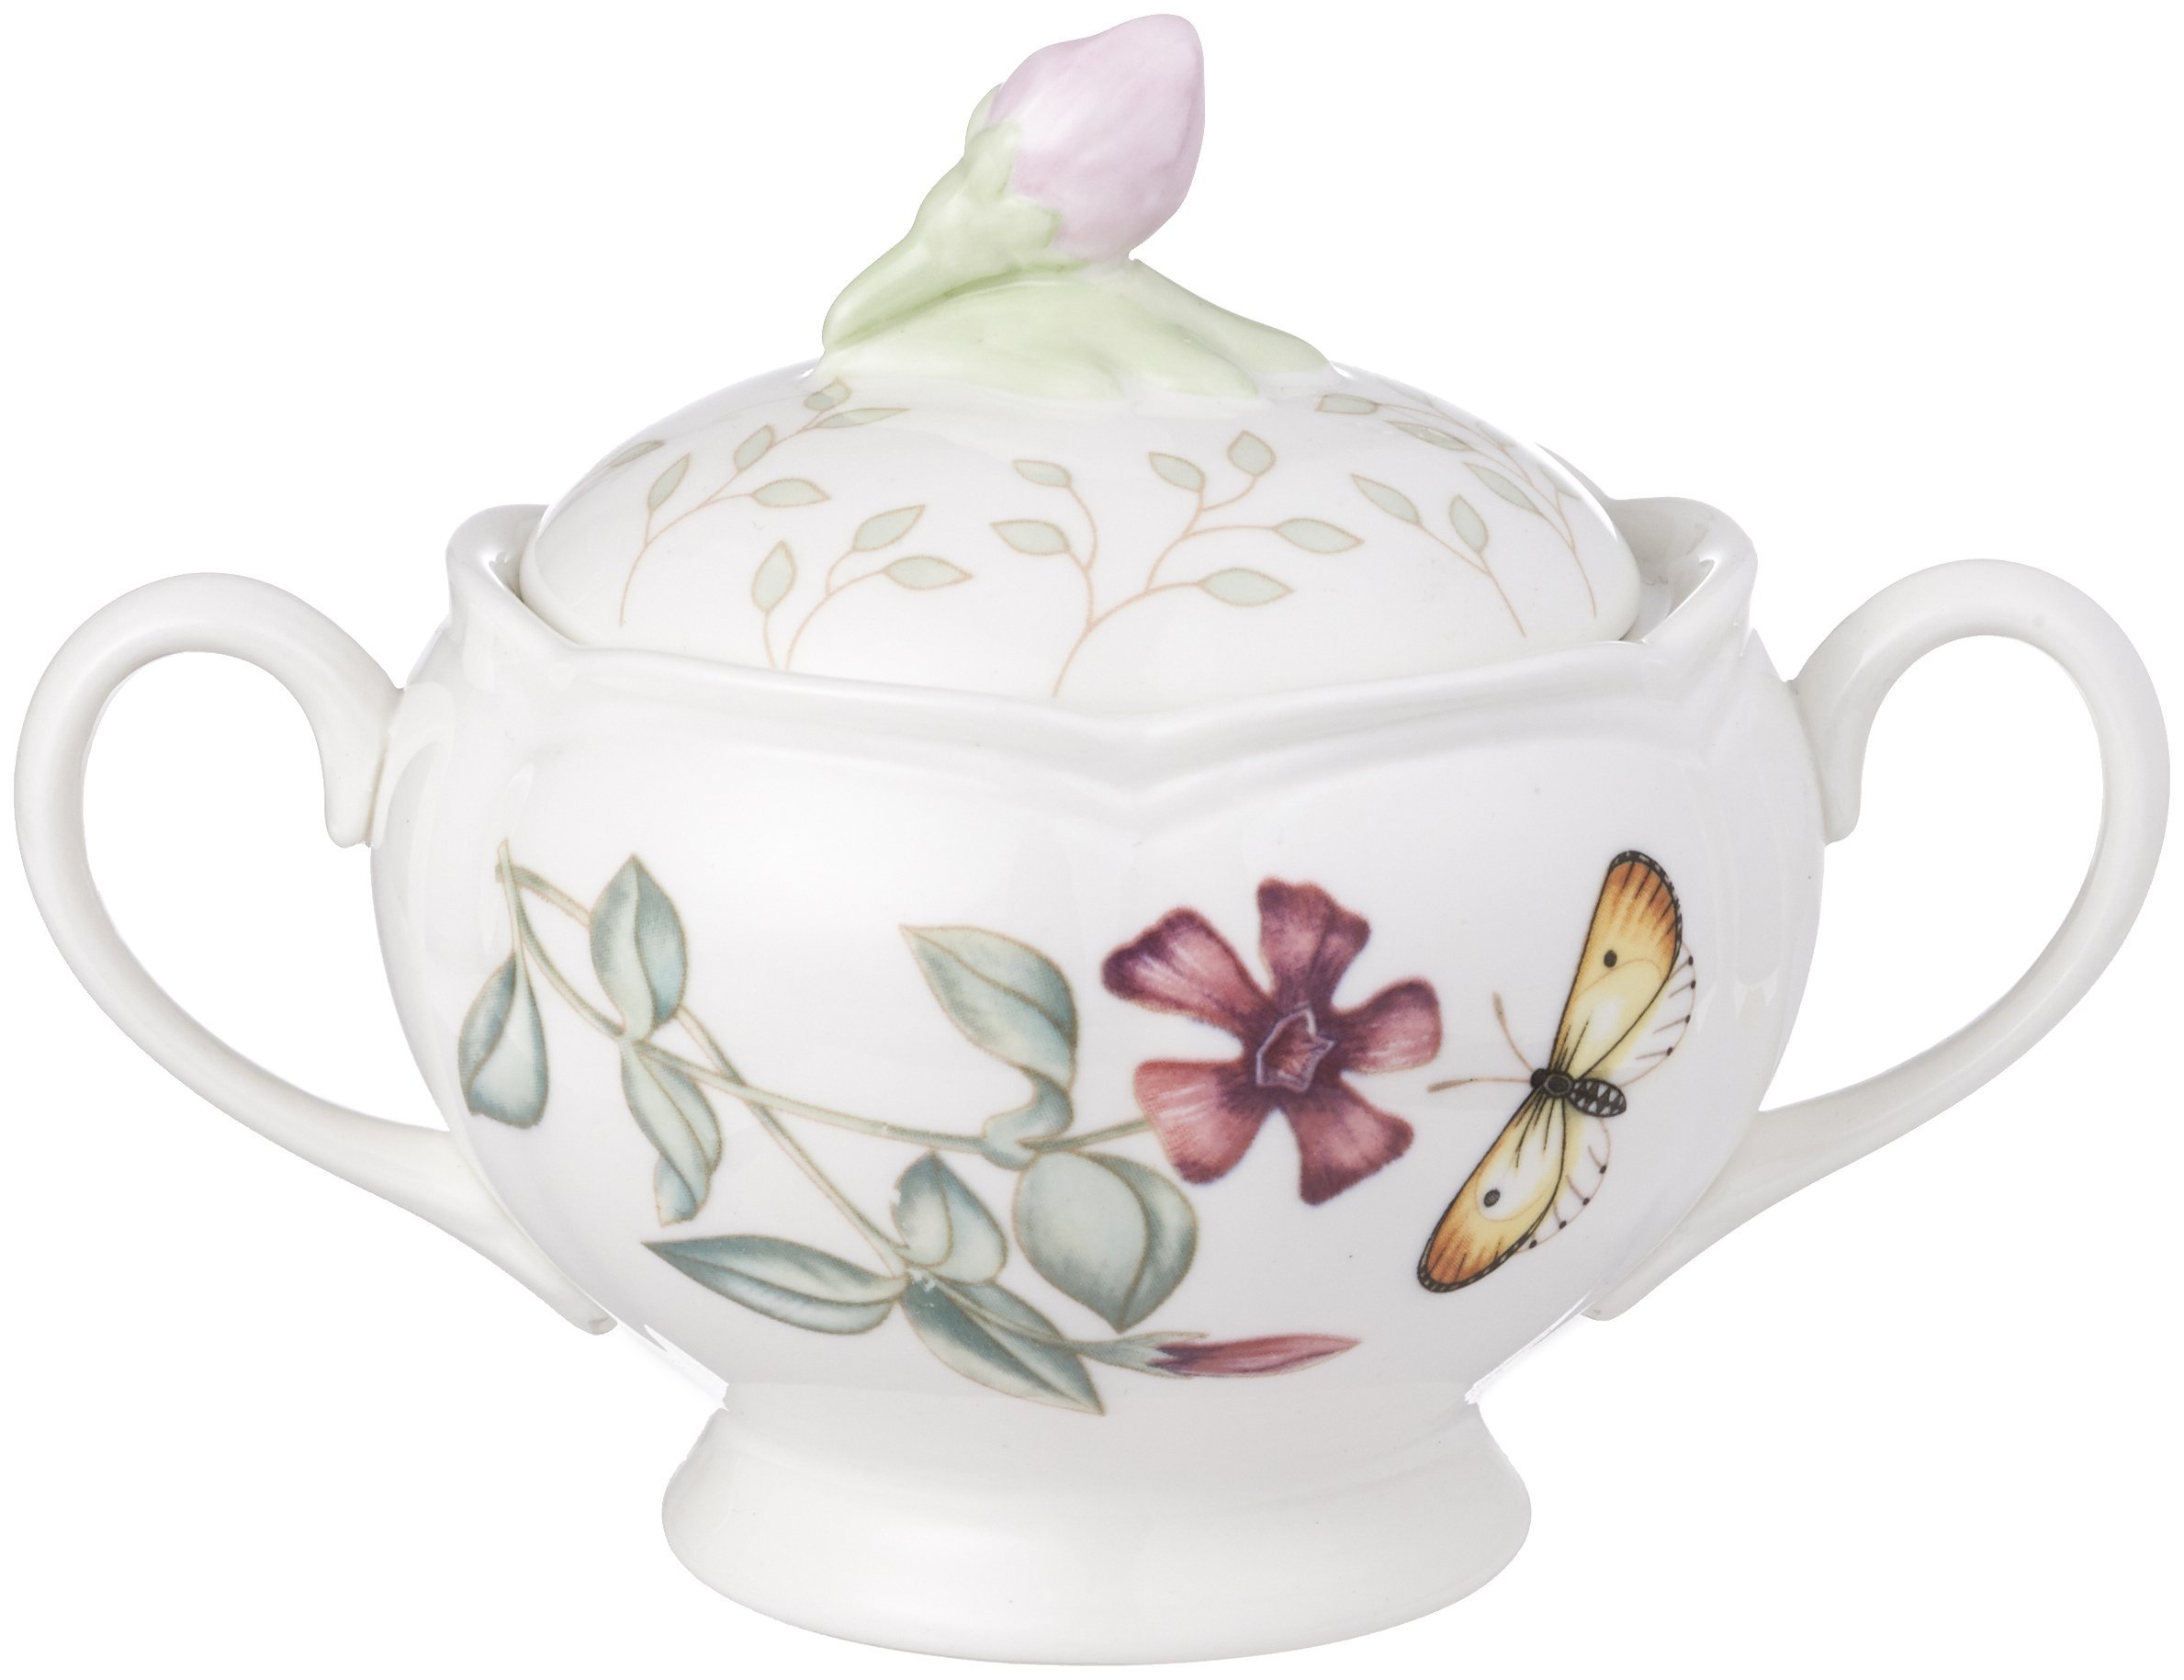 Lenox Butterfly Meadow Double Handled Sugar Bowl with Lid, White -